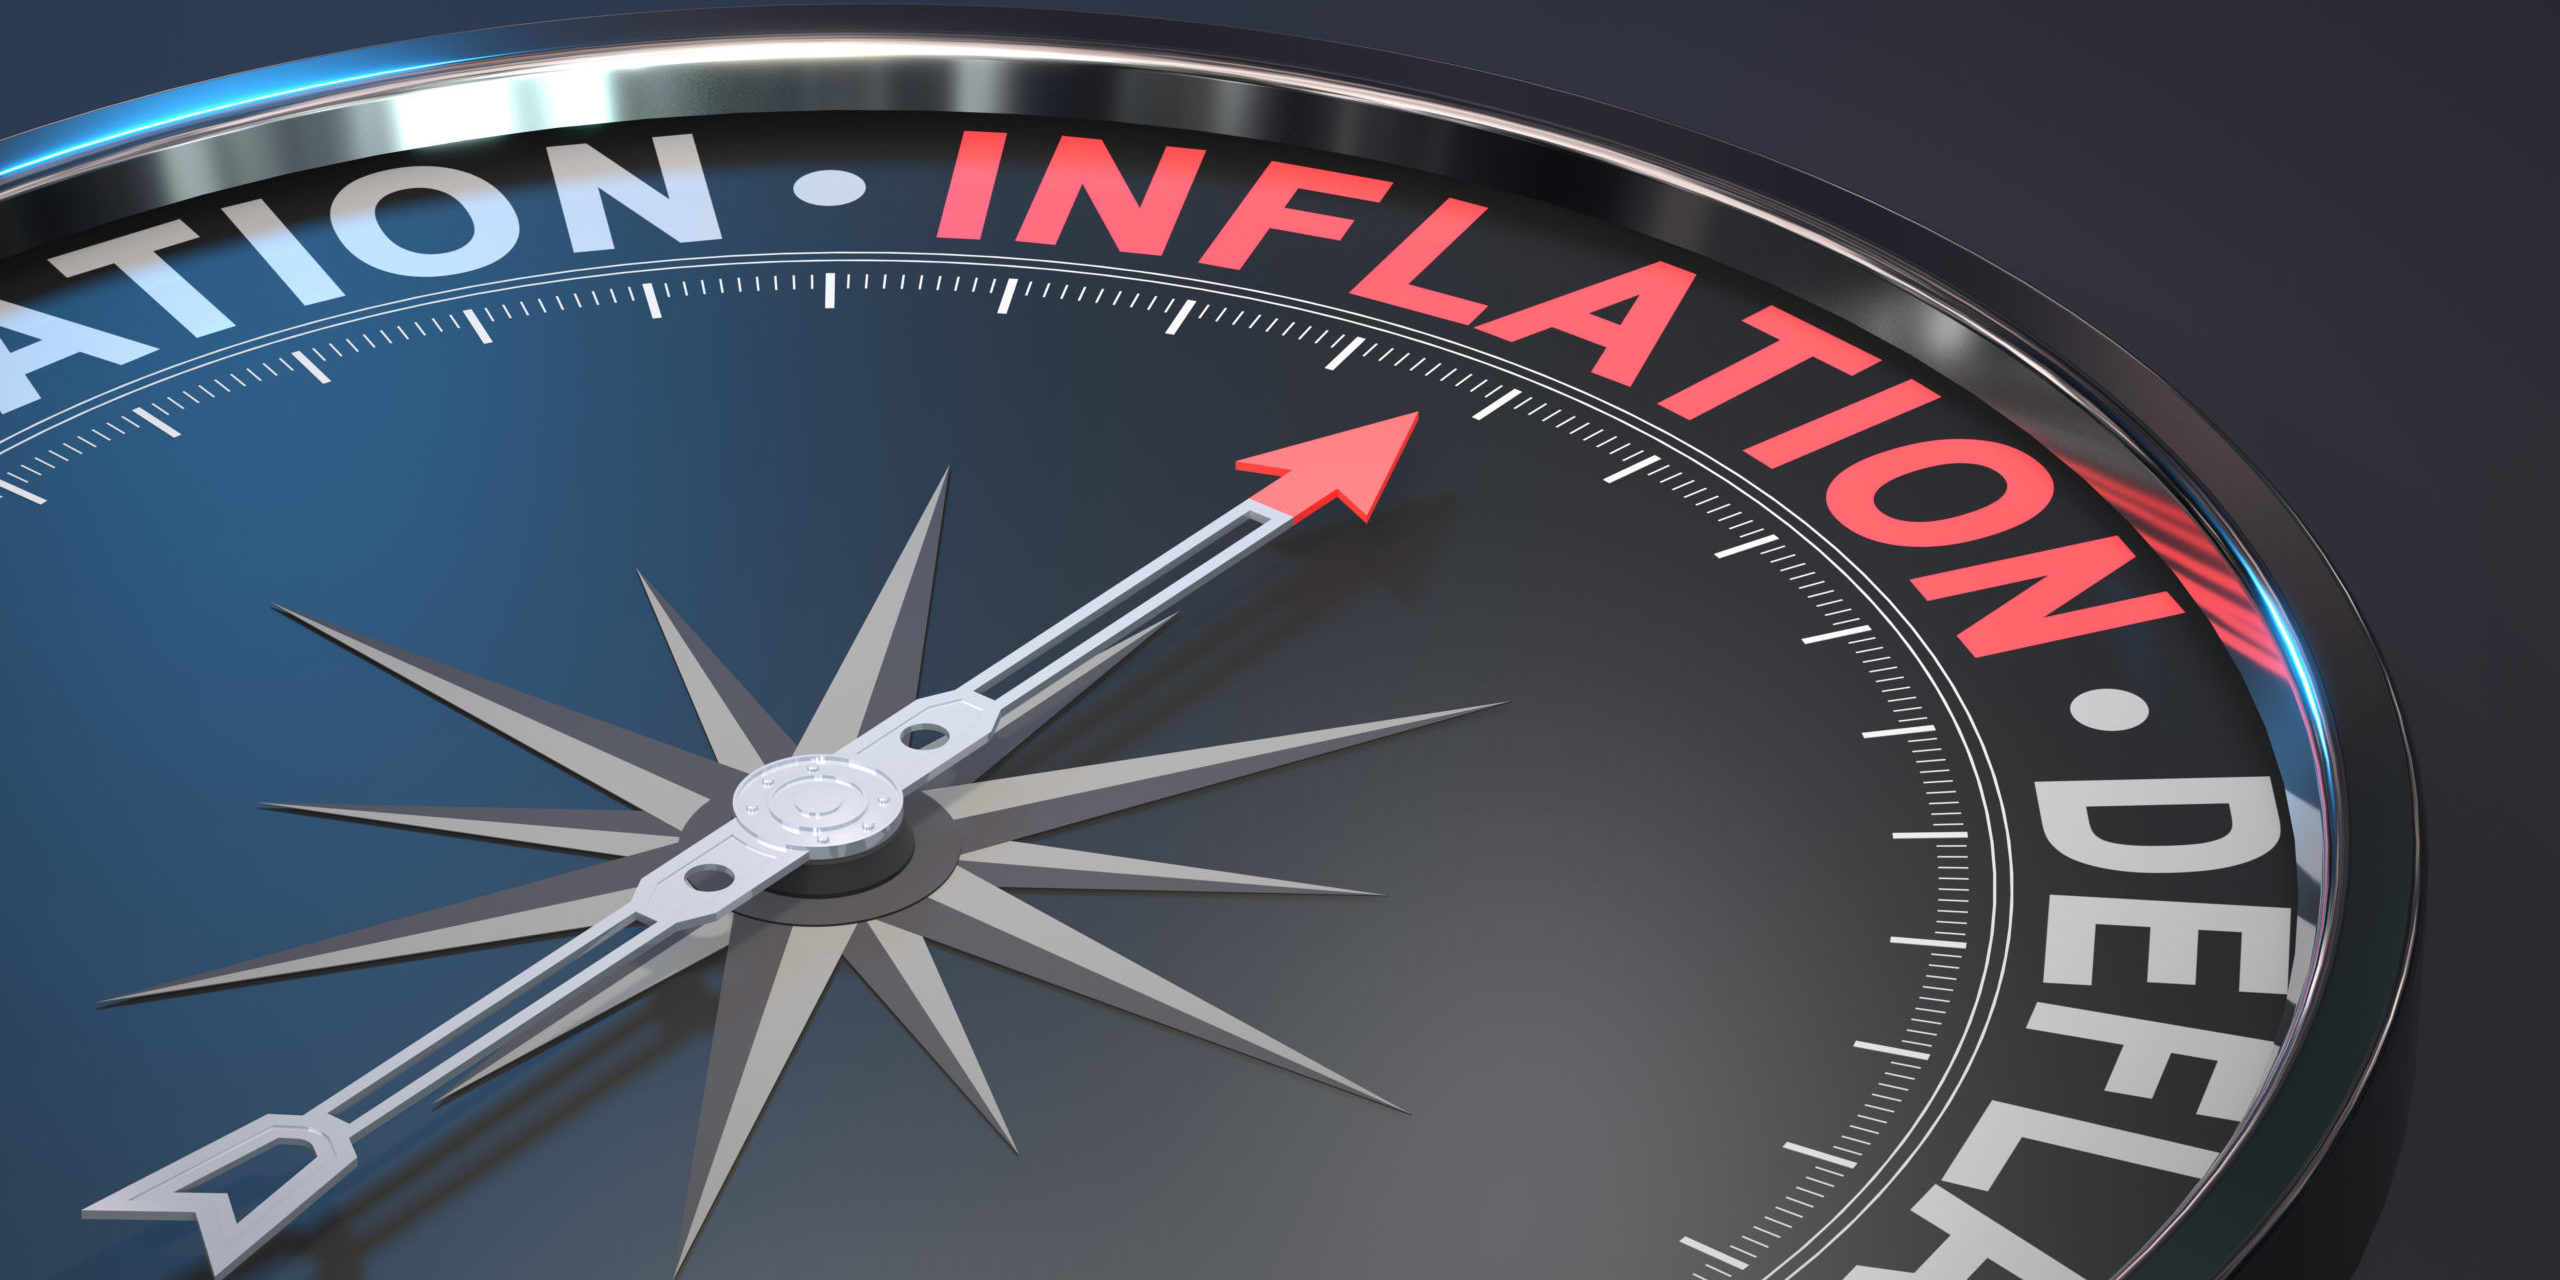 Using the right pricing strategies in times of high inflation can have positive impacts on most companies